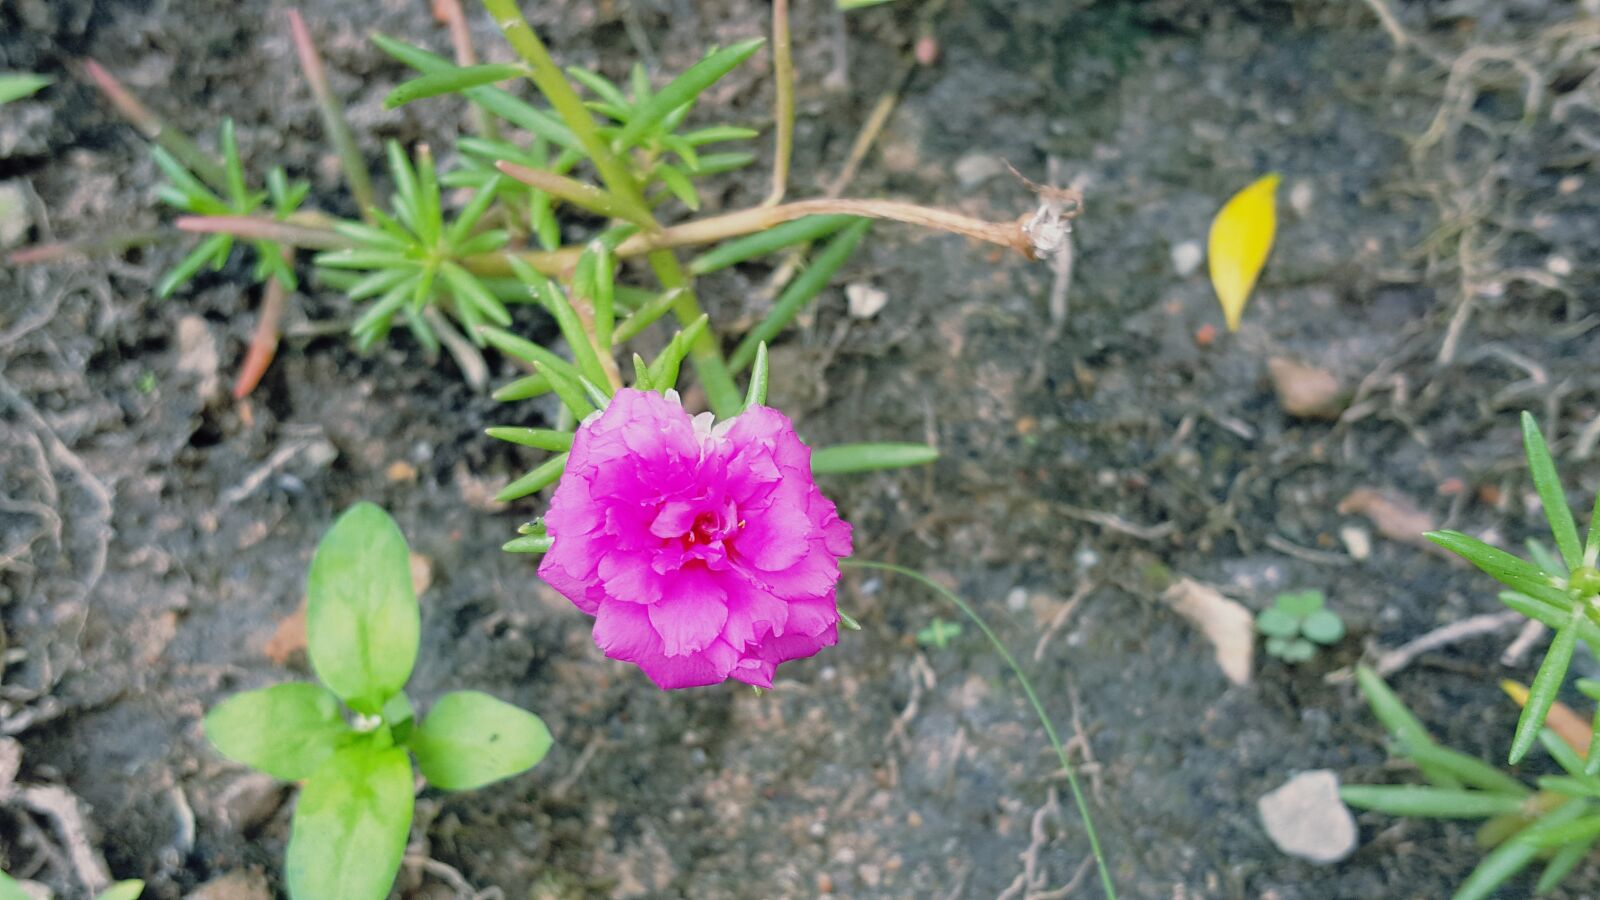 Samsung Galaxy S6 sample photo. Flower flowers, nature natures photography